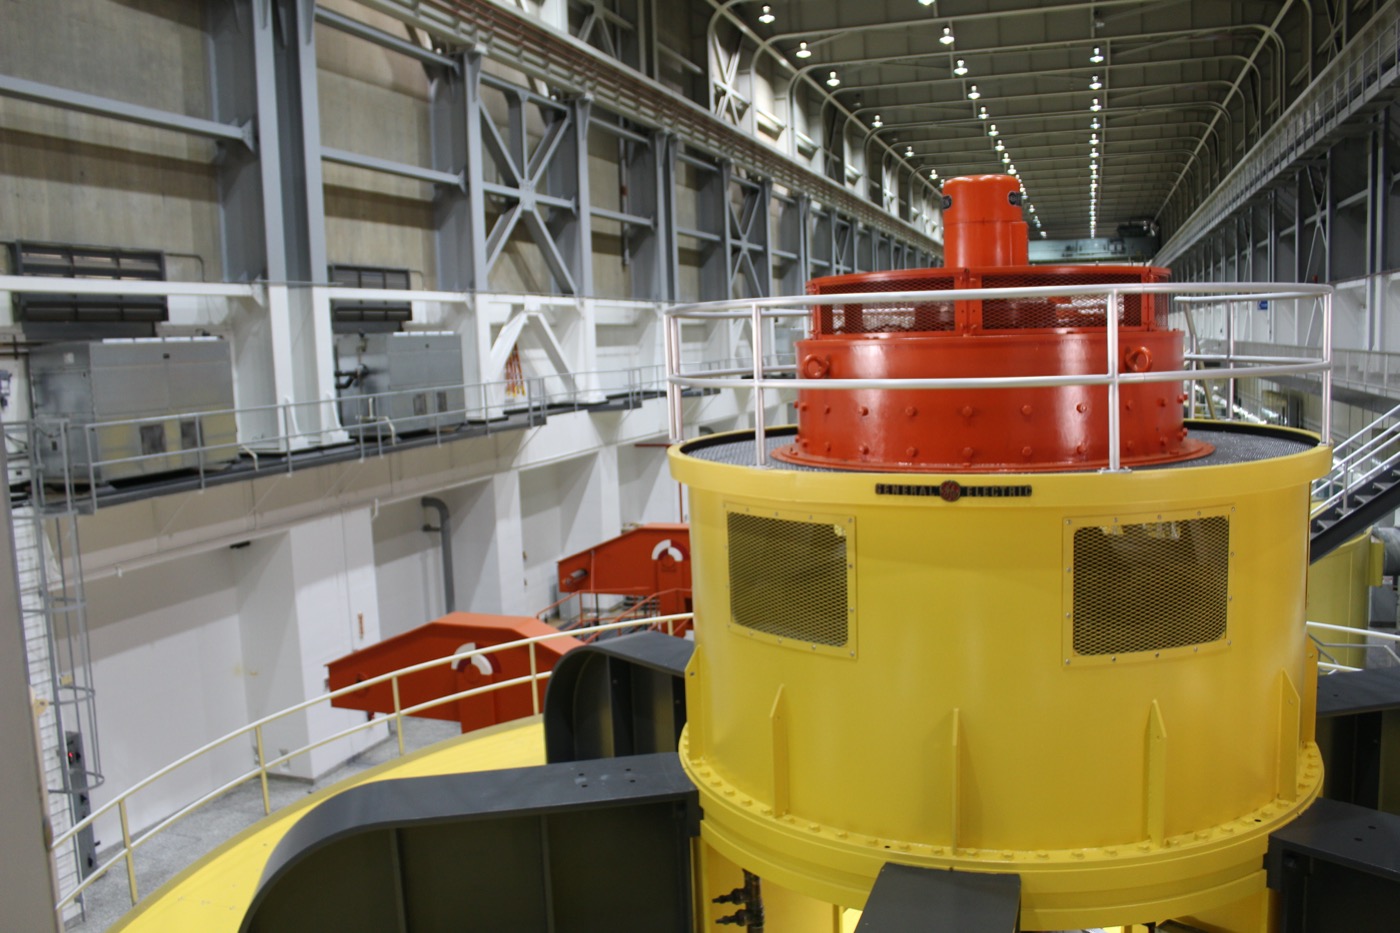 an interior of a large industrial building, with a large cylindrical machine in the foreground